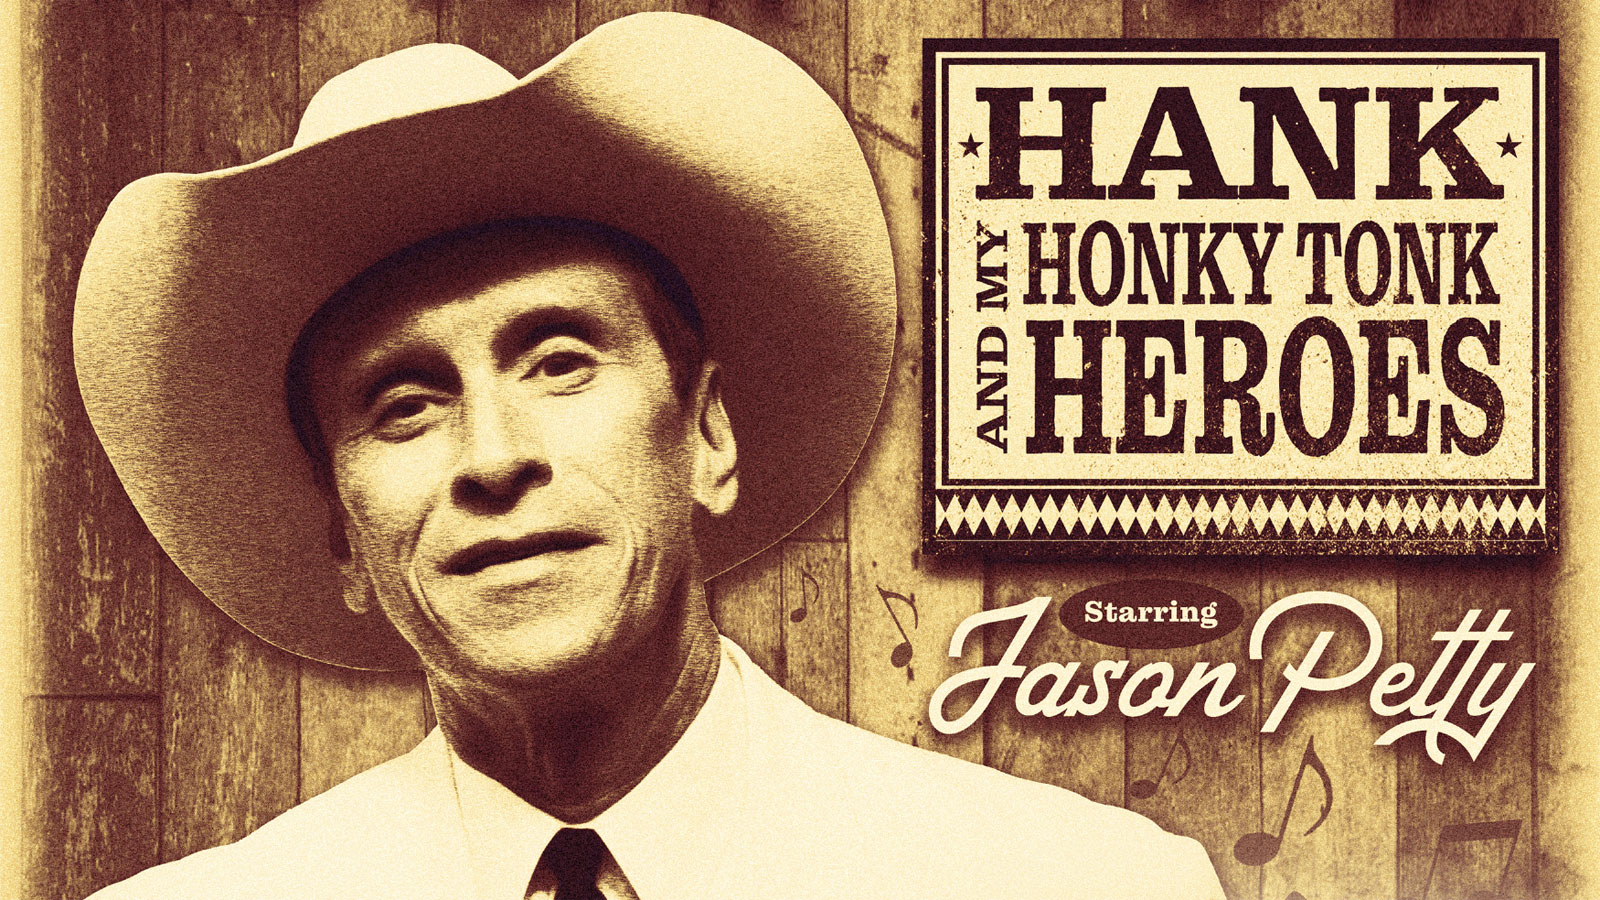 Jason Petty with Hank and the Honky Tonk Heroes